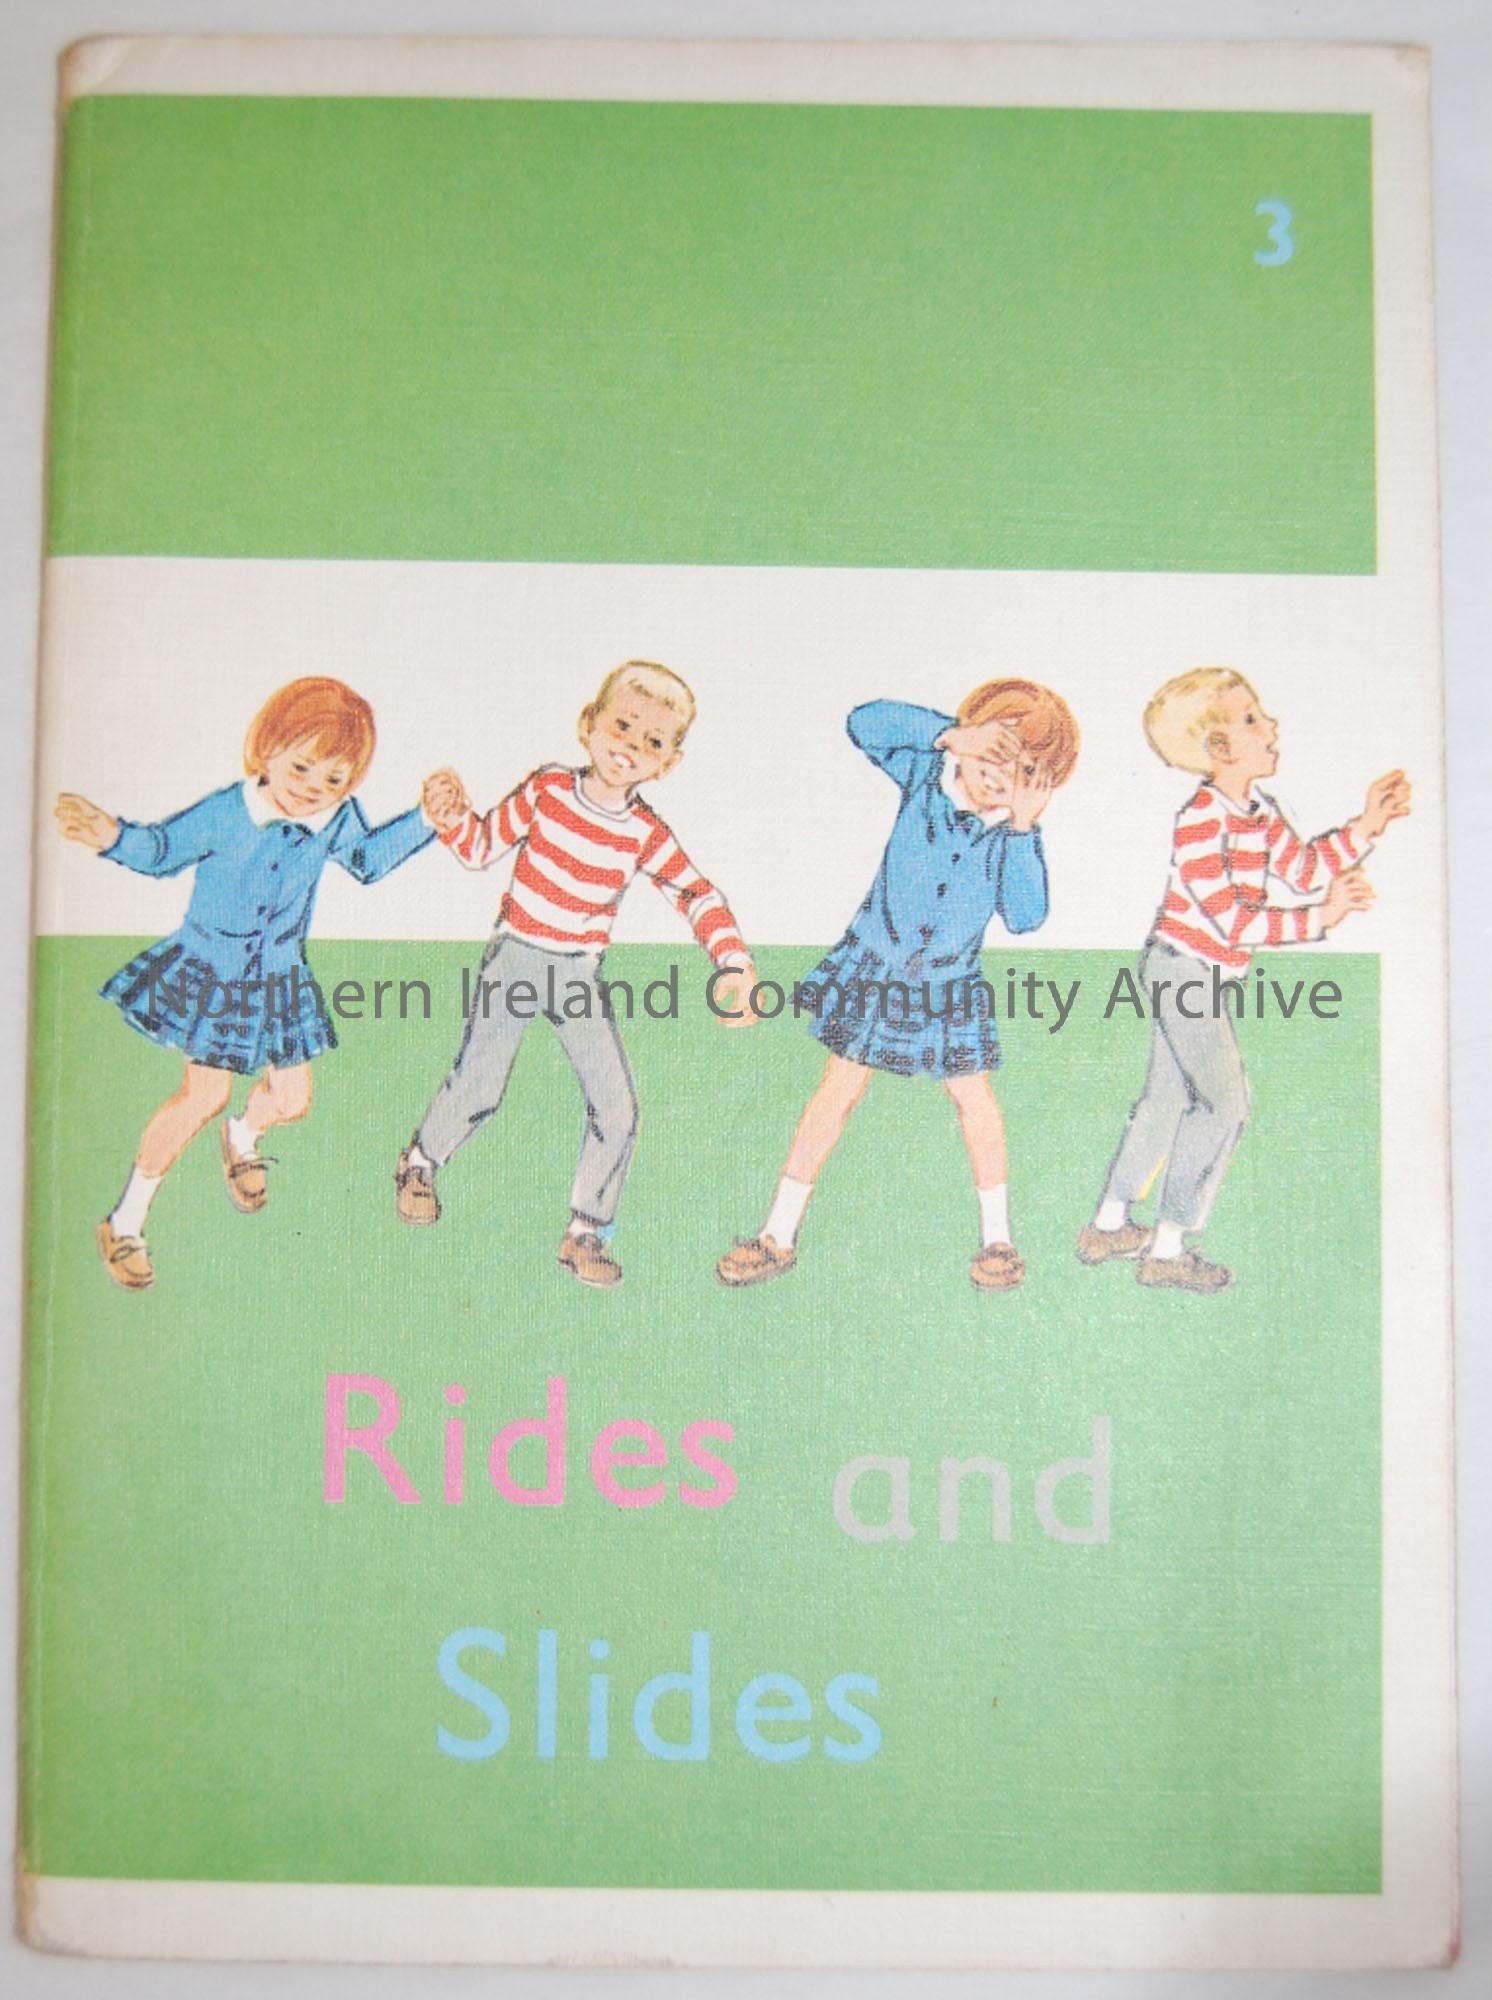 ‘Kathy and Mark Basic Readers 3: Rides and Slides’ By O’Donnell and Munro, published by Nisbet & Co. Ltd, 1970. Green cover.